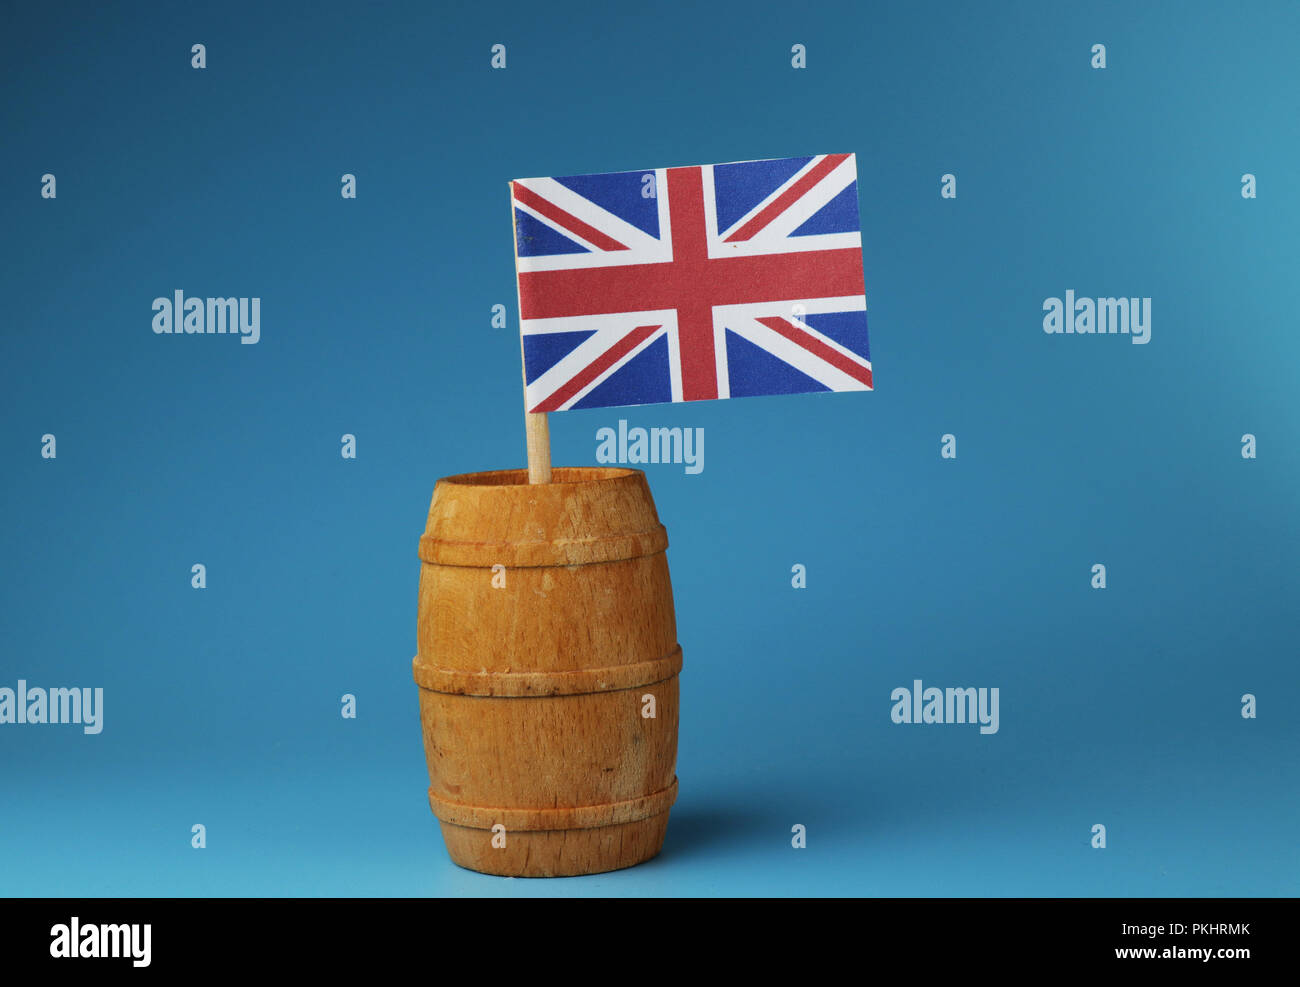 A flag of United kingdom, Great Britain, on wooden stick in wooden barrel. Blue background Stock Photo